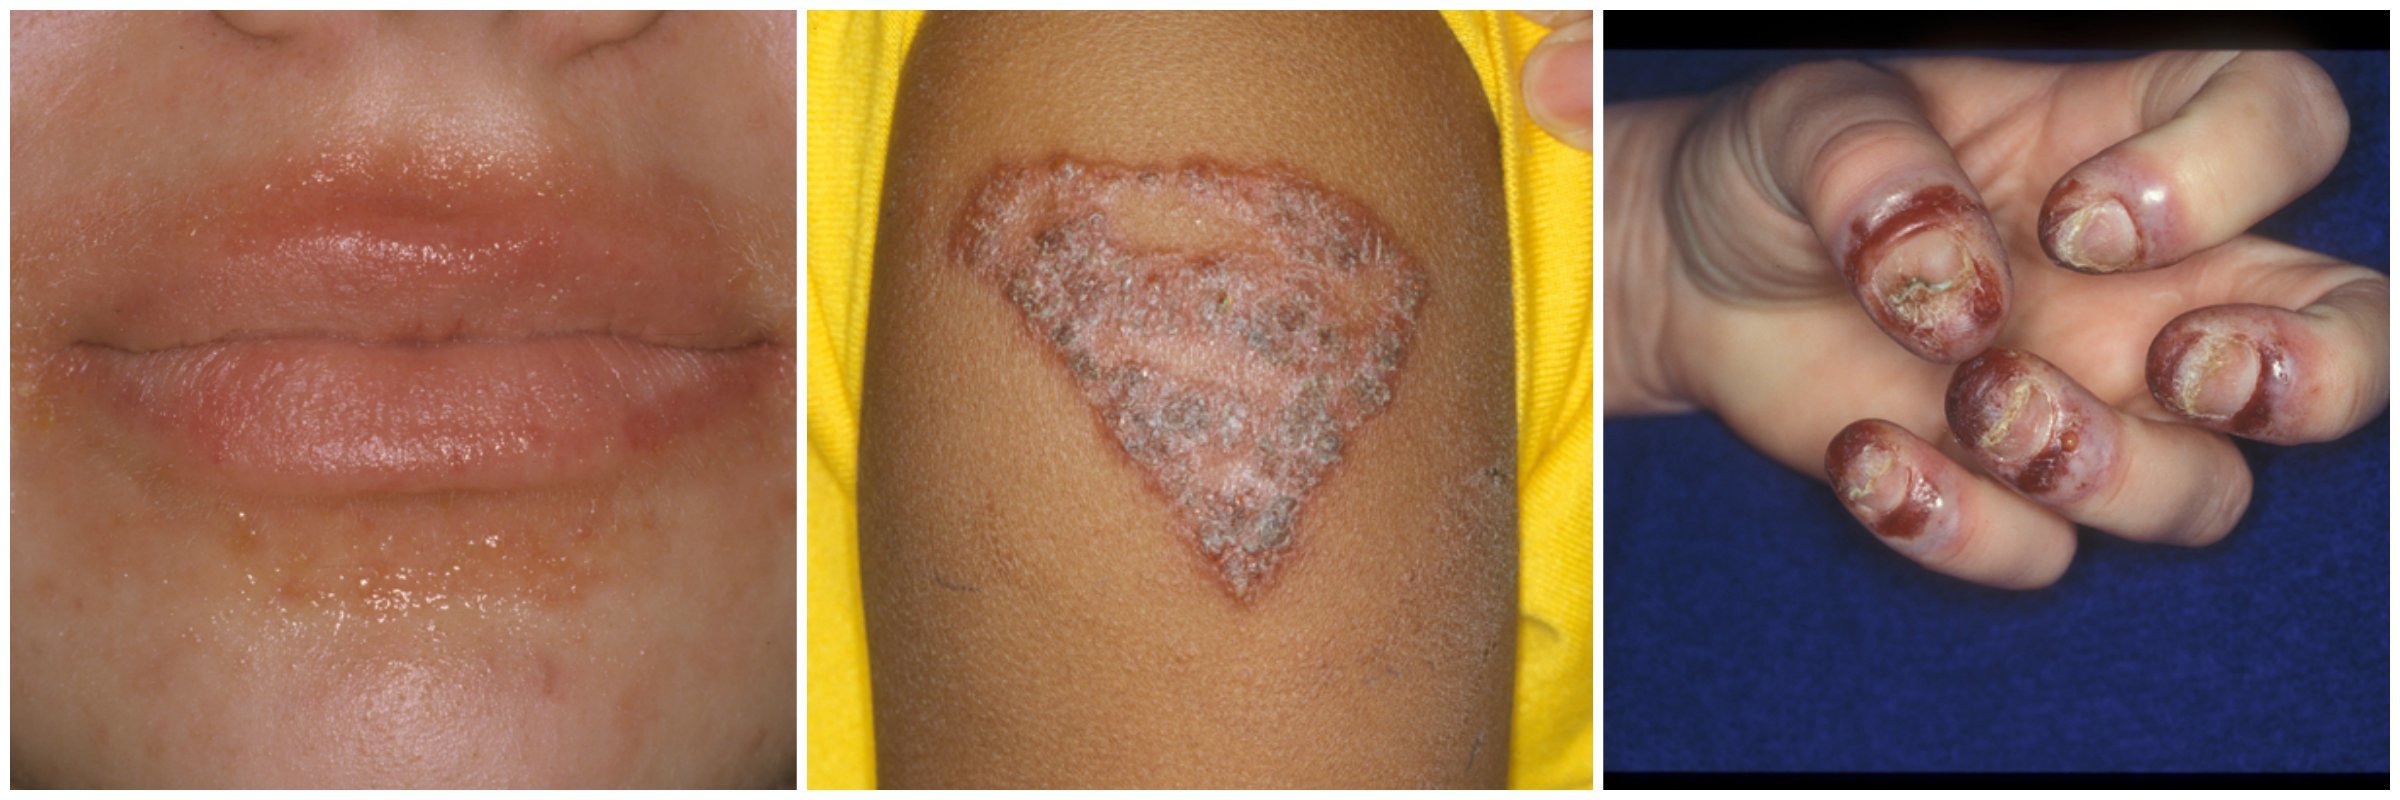 Many substances can cause eczema